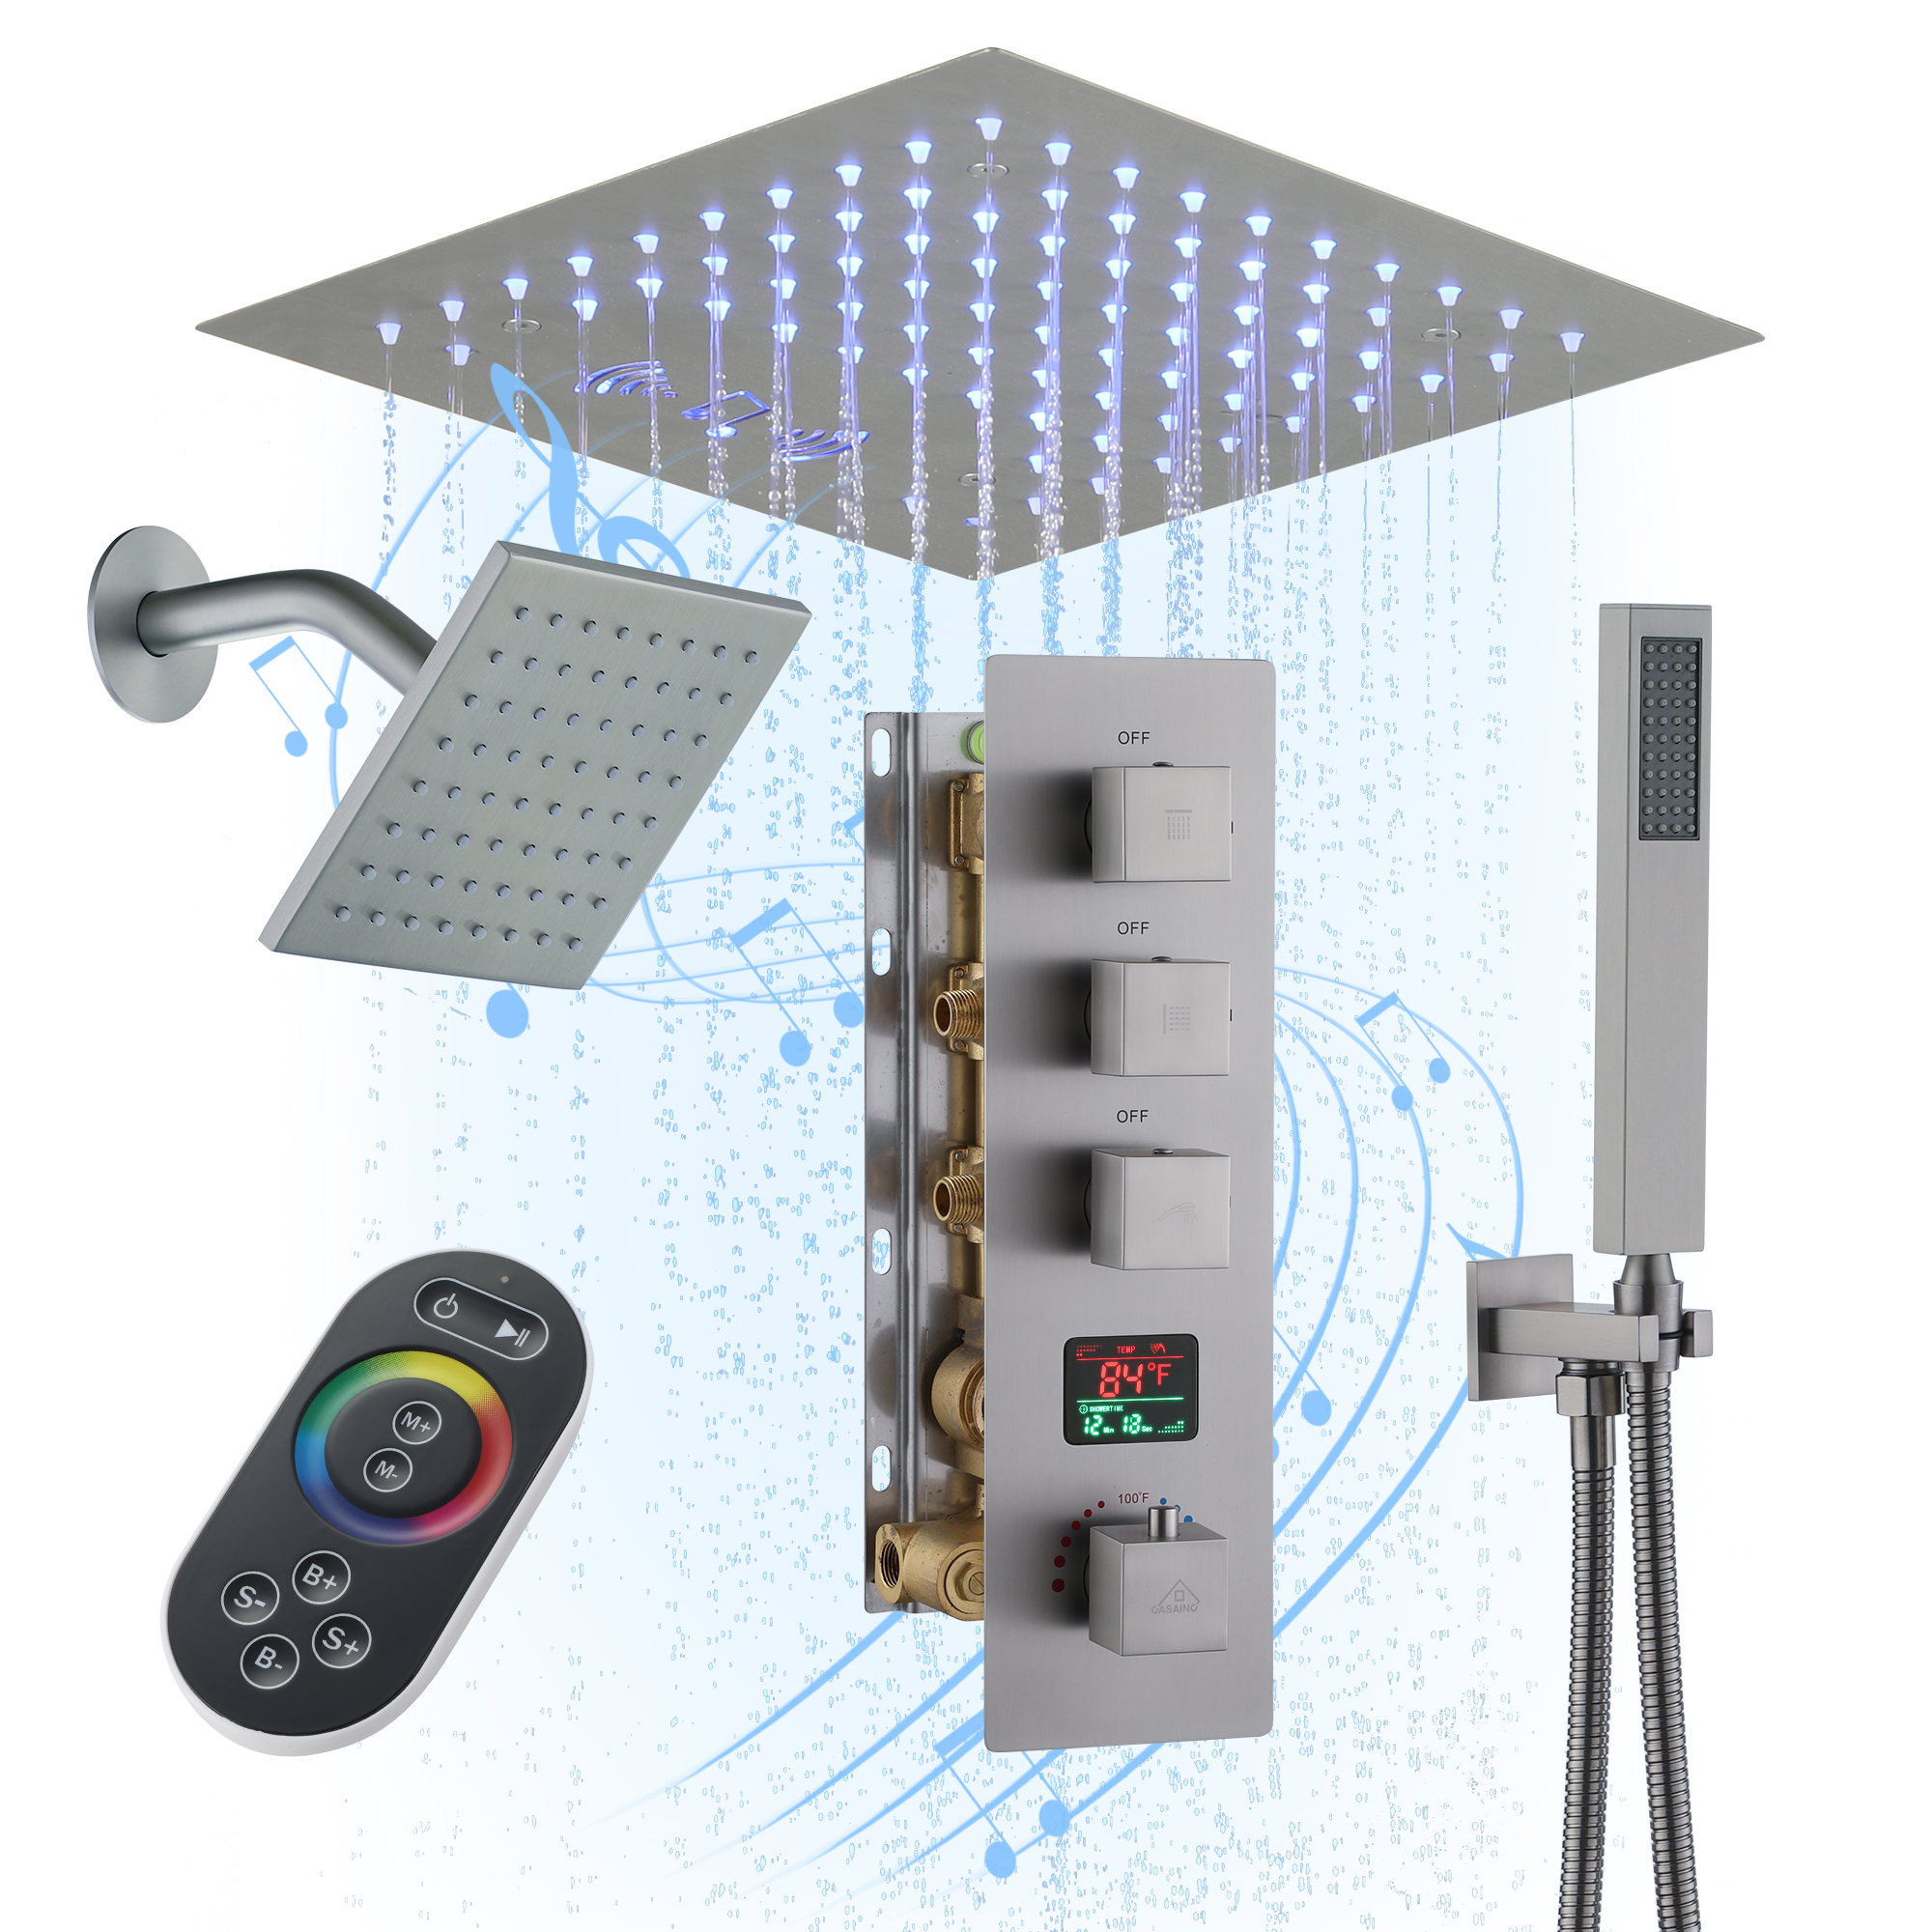 Luxurious Showerhead Shower System With 64 Colors Of Led Lighting And Bluetooth Technology to Suit and Deliver a Desirable Bathroom Experience